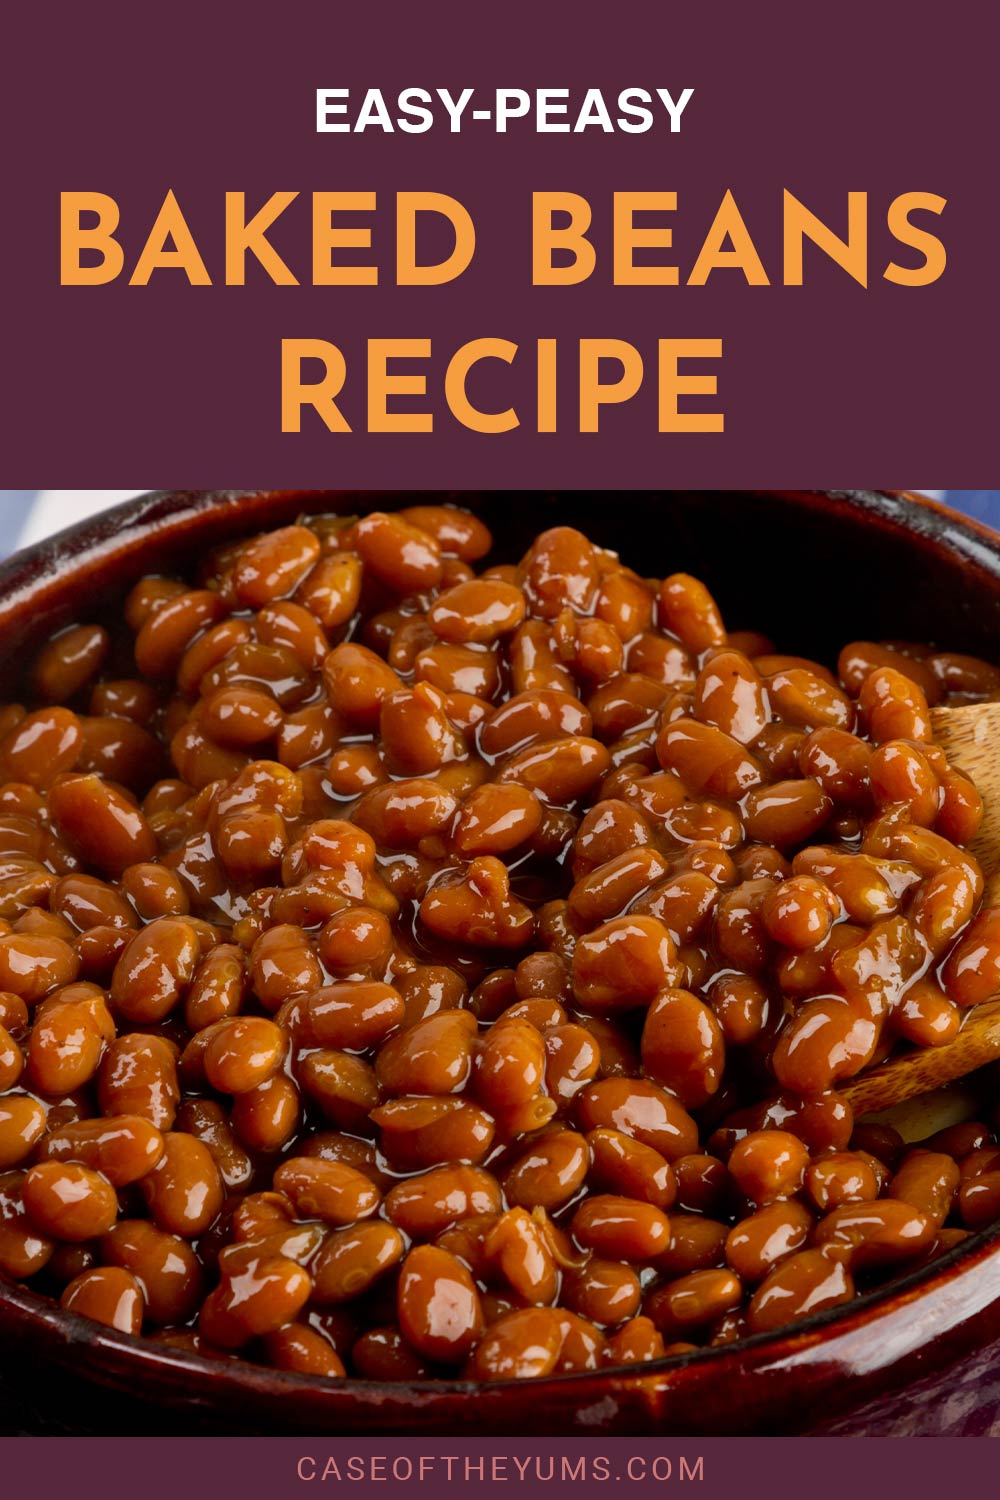 A dish of beans in clay pot - Easy-Peasy Baked Beans Recipe.